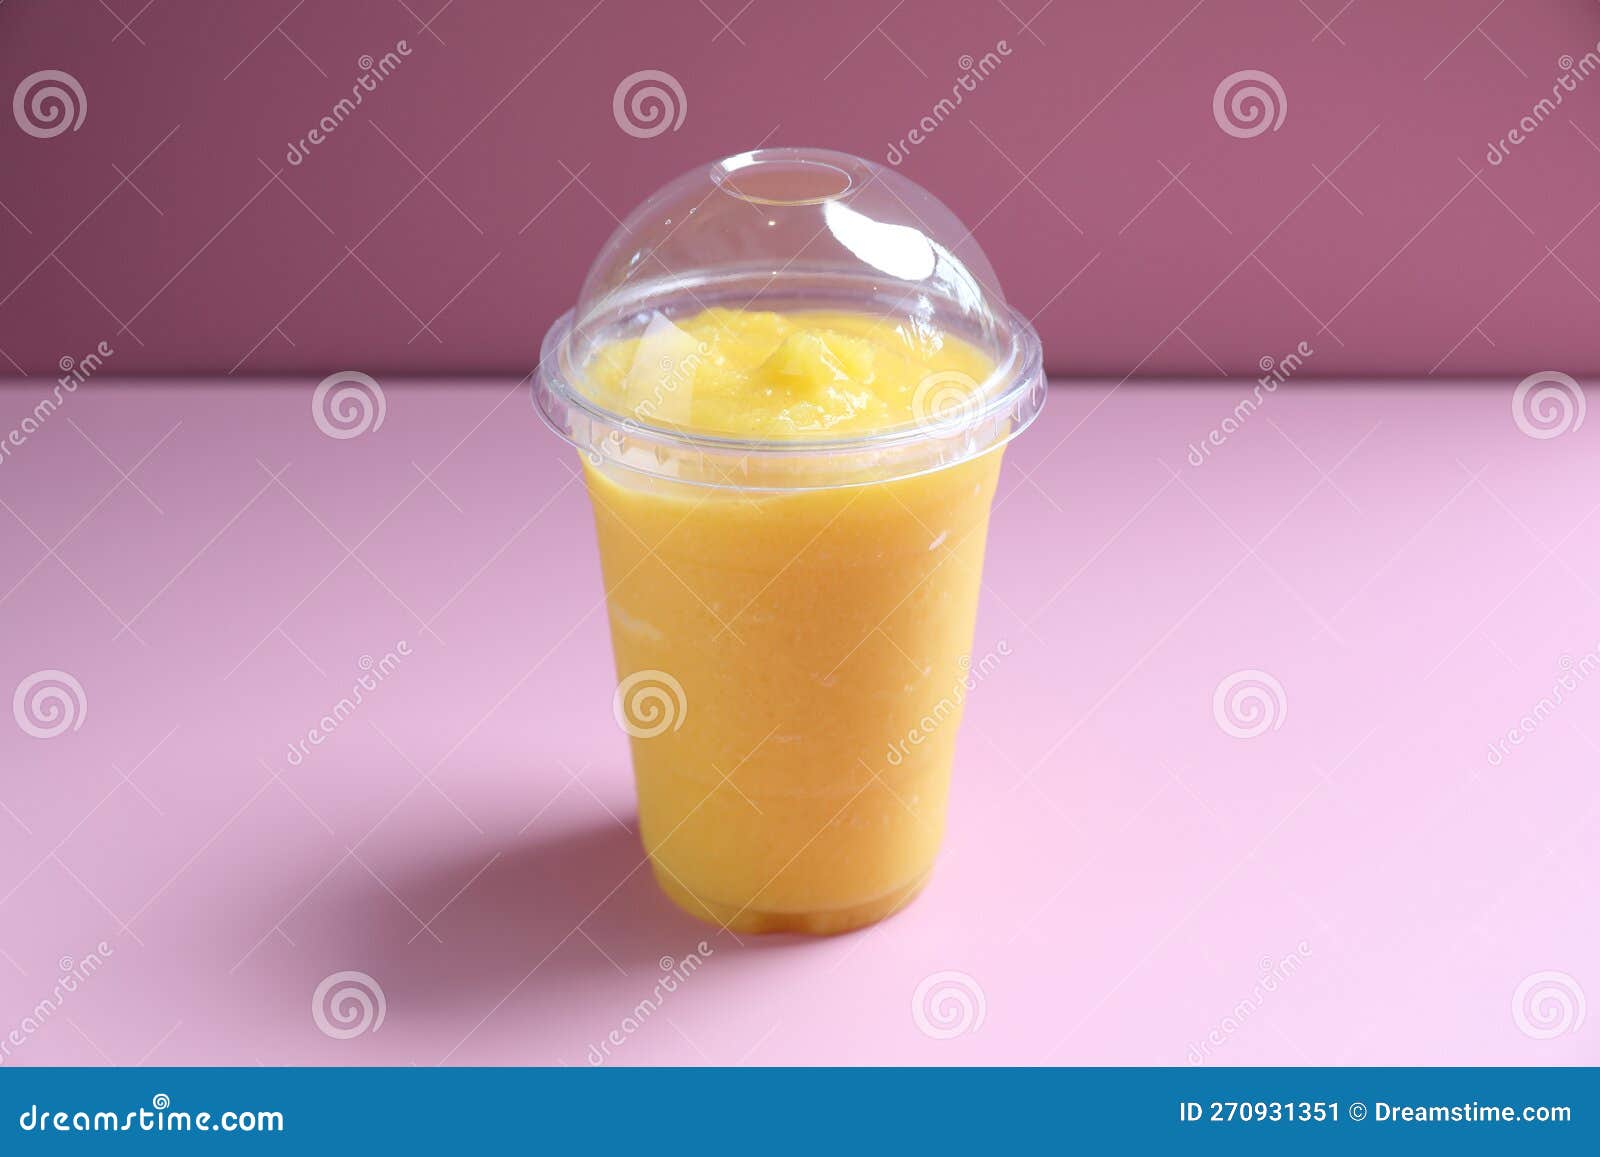 805 Mango Smoothie Plastic Cup Images, Stock Photos, 3D objects